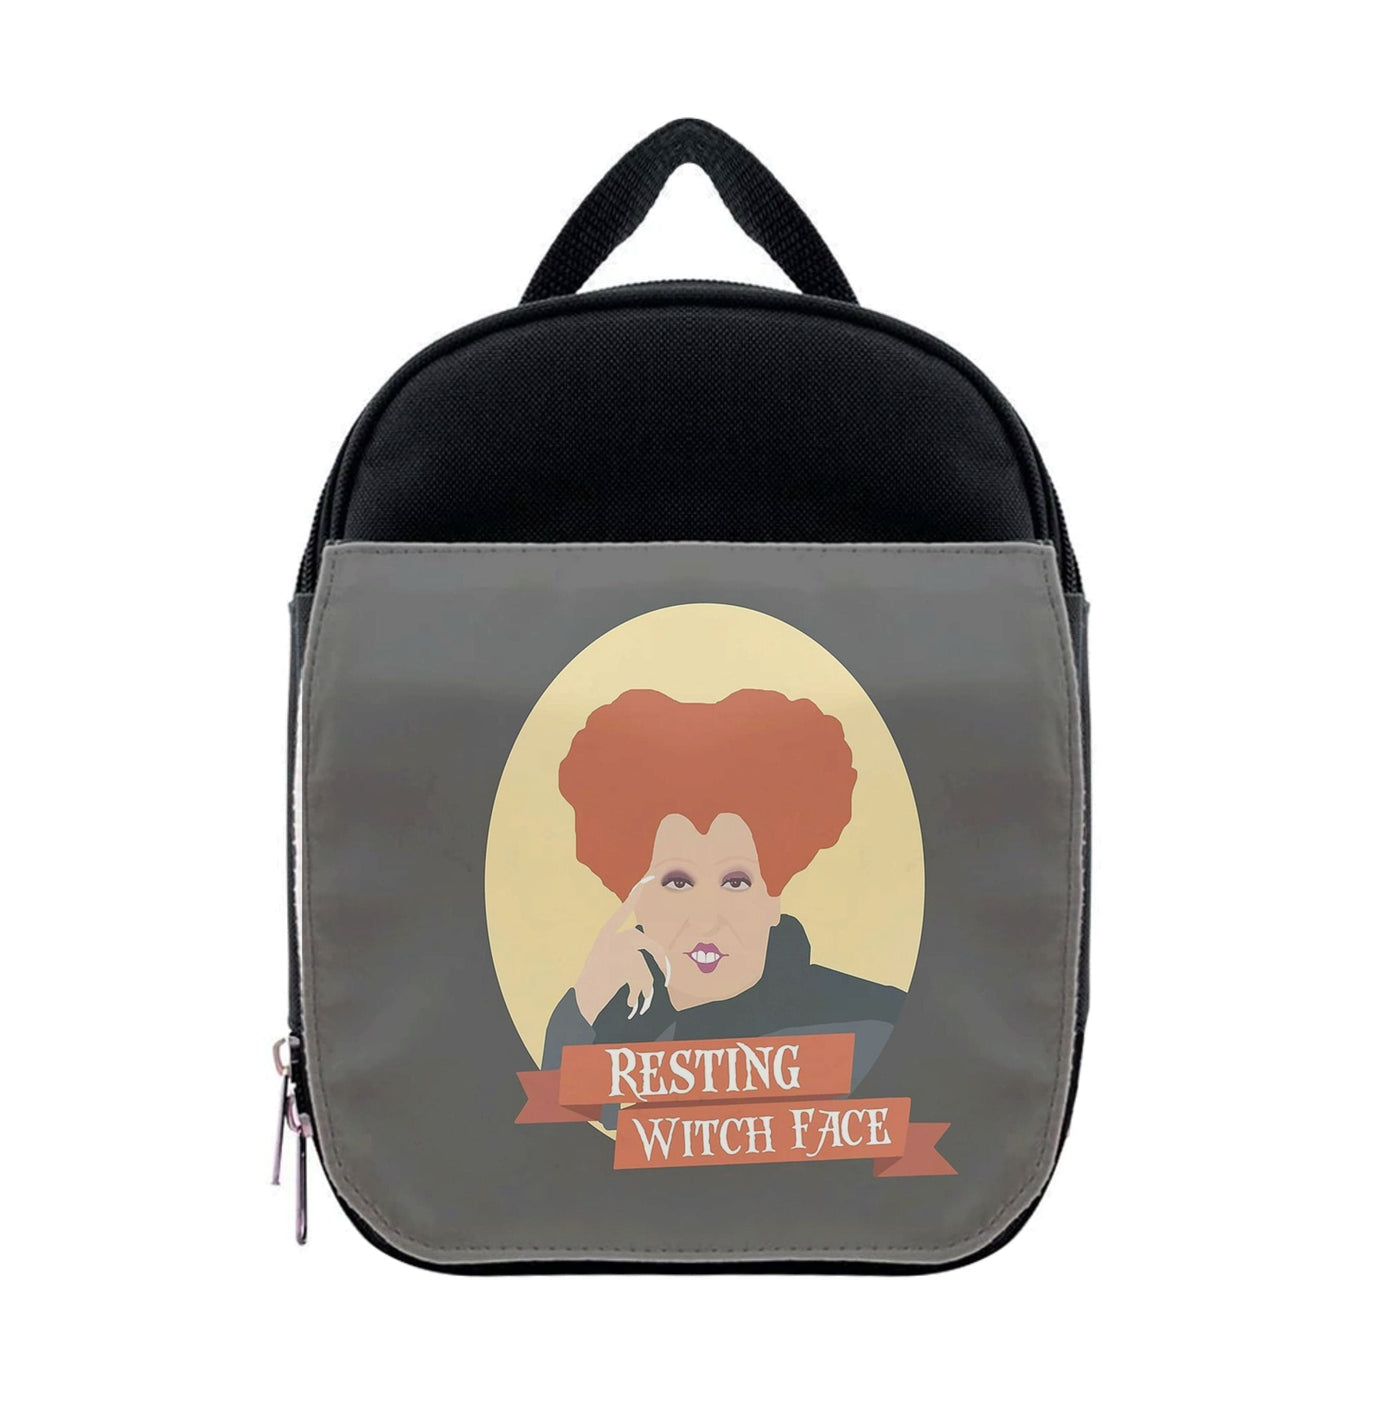 Resting Witch Face - Hocus Pocus Lunchbox